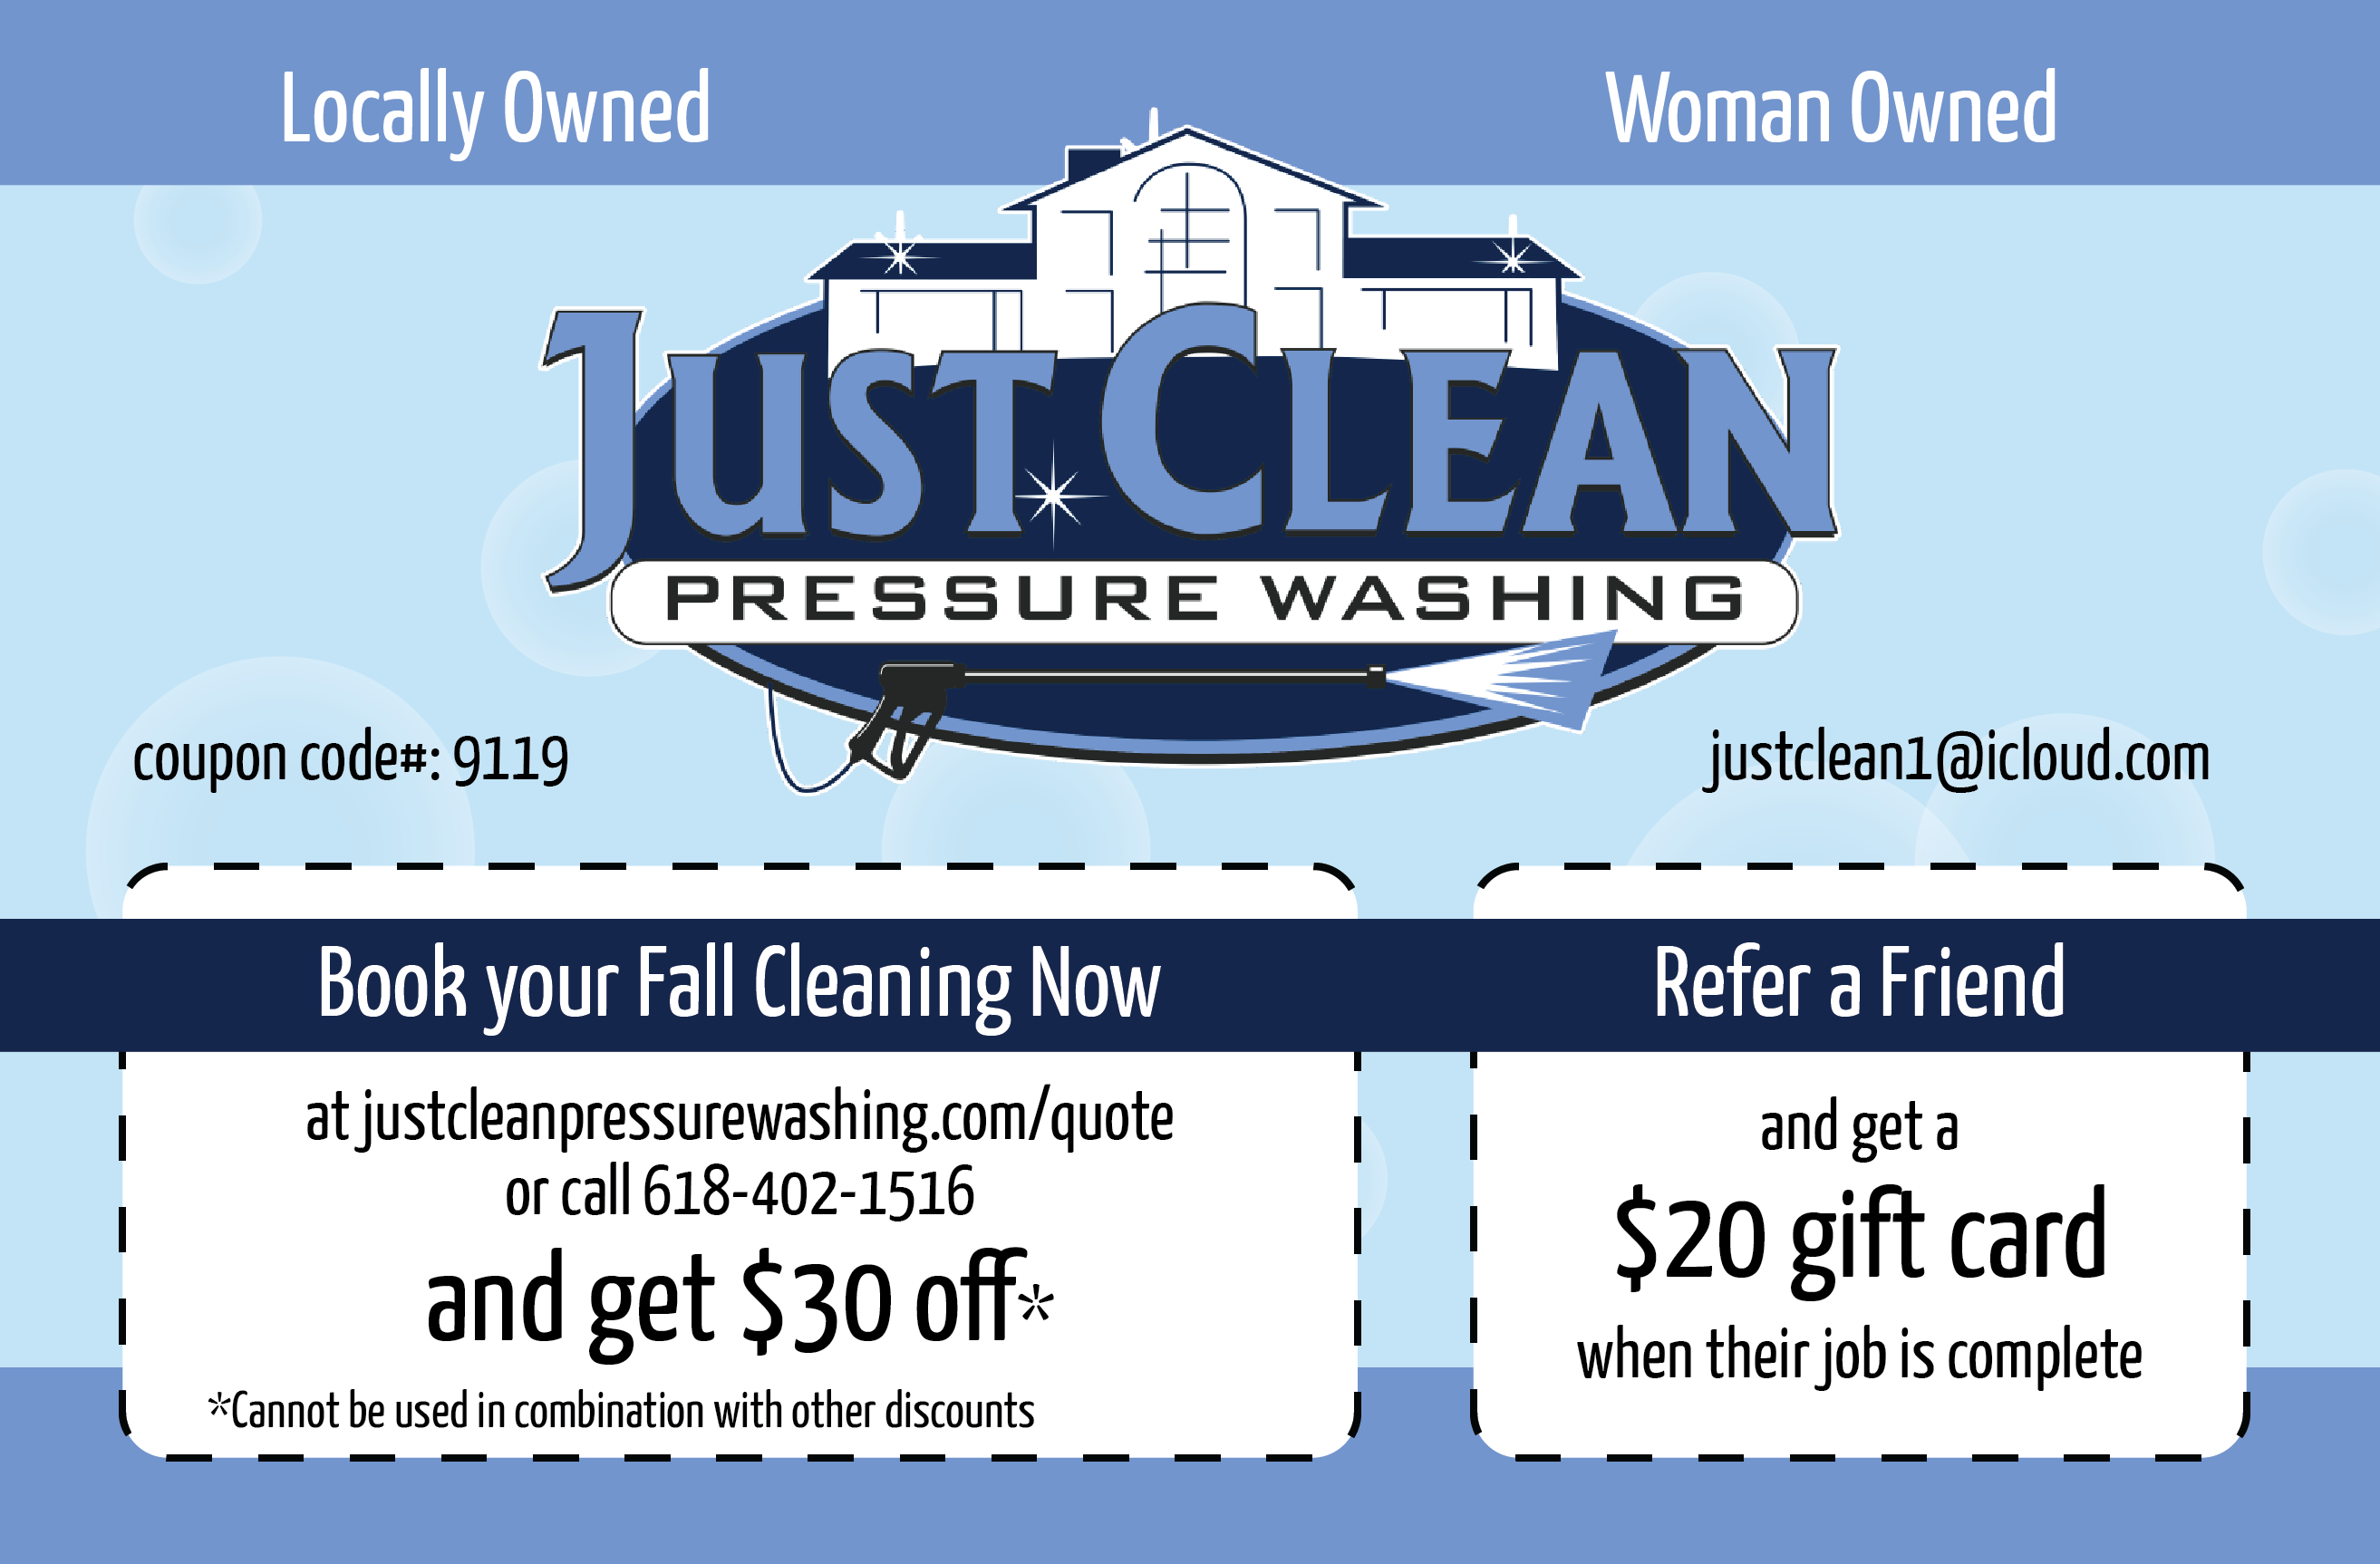 Fall Cleaning Promo 2019 from Just Clean Pressure Washing in O'Fallon IL